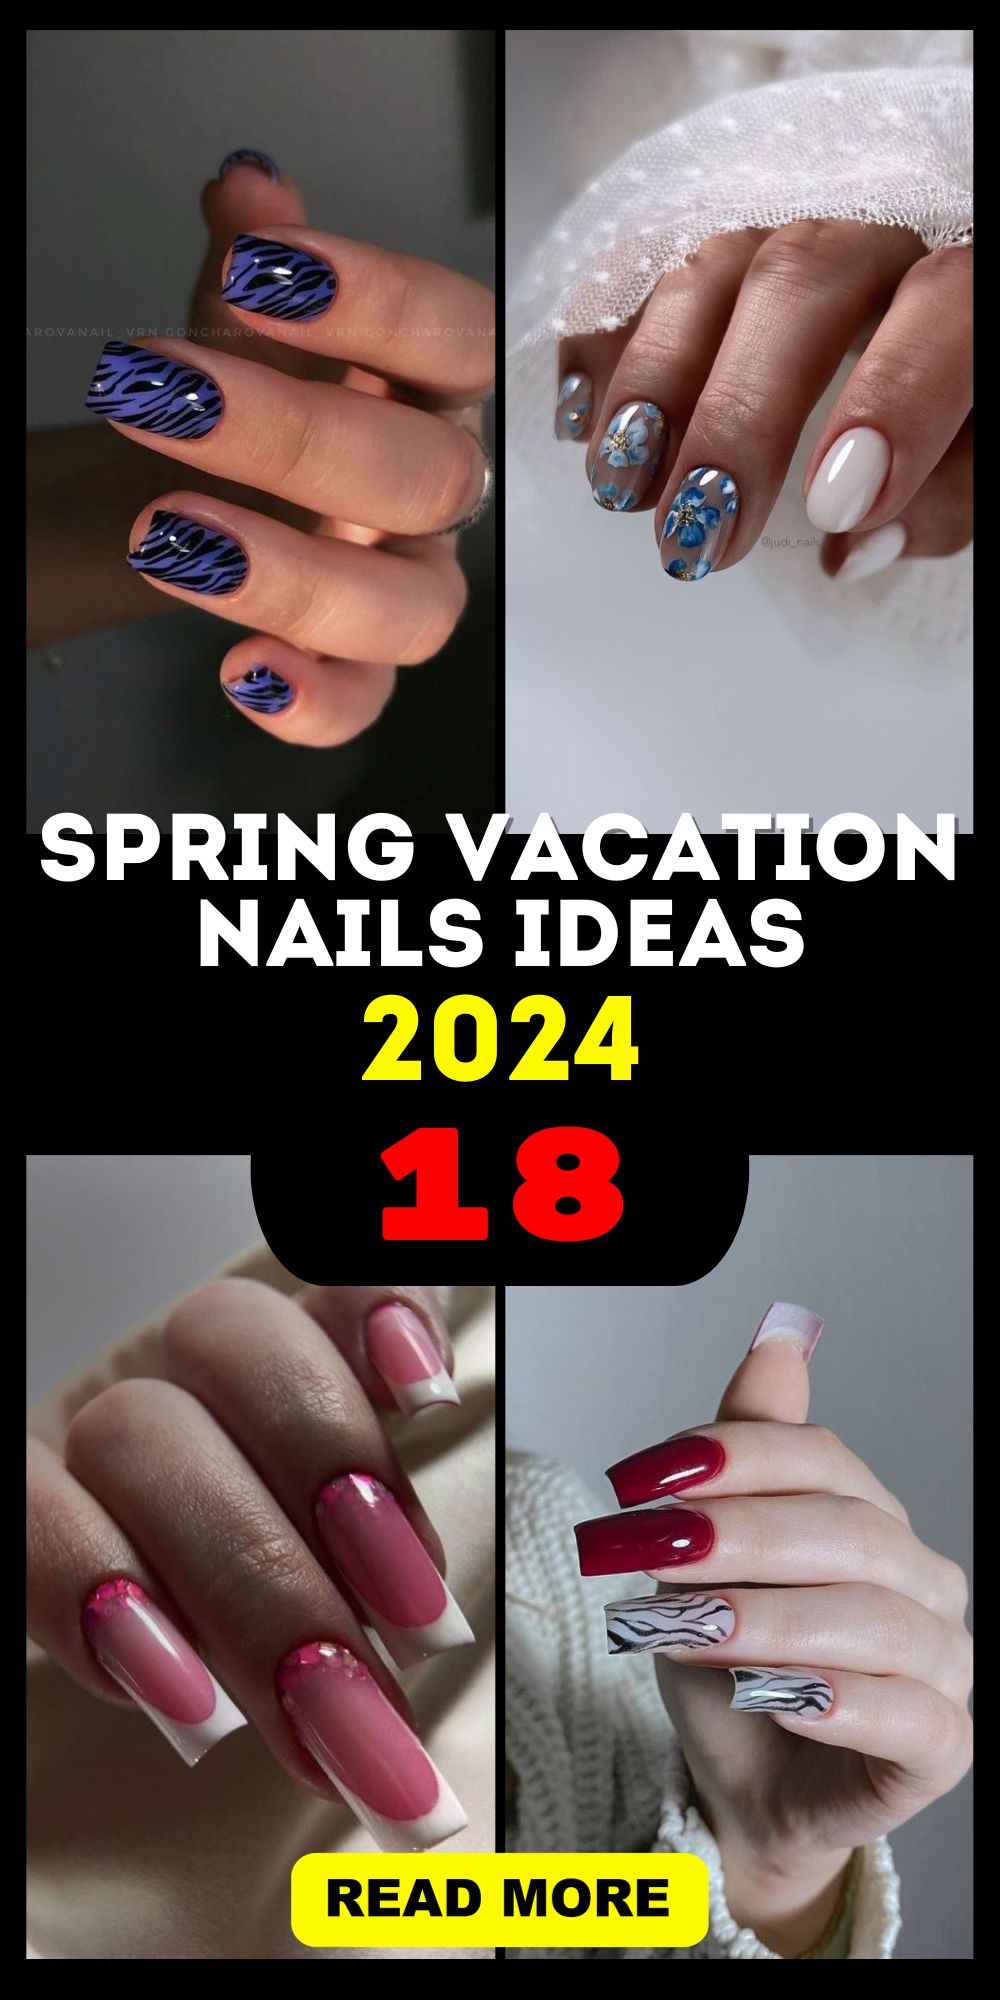 Top Nail Designs for Your Spring Vacation 2024 – Get the Perfect Look